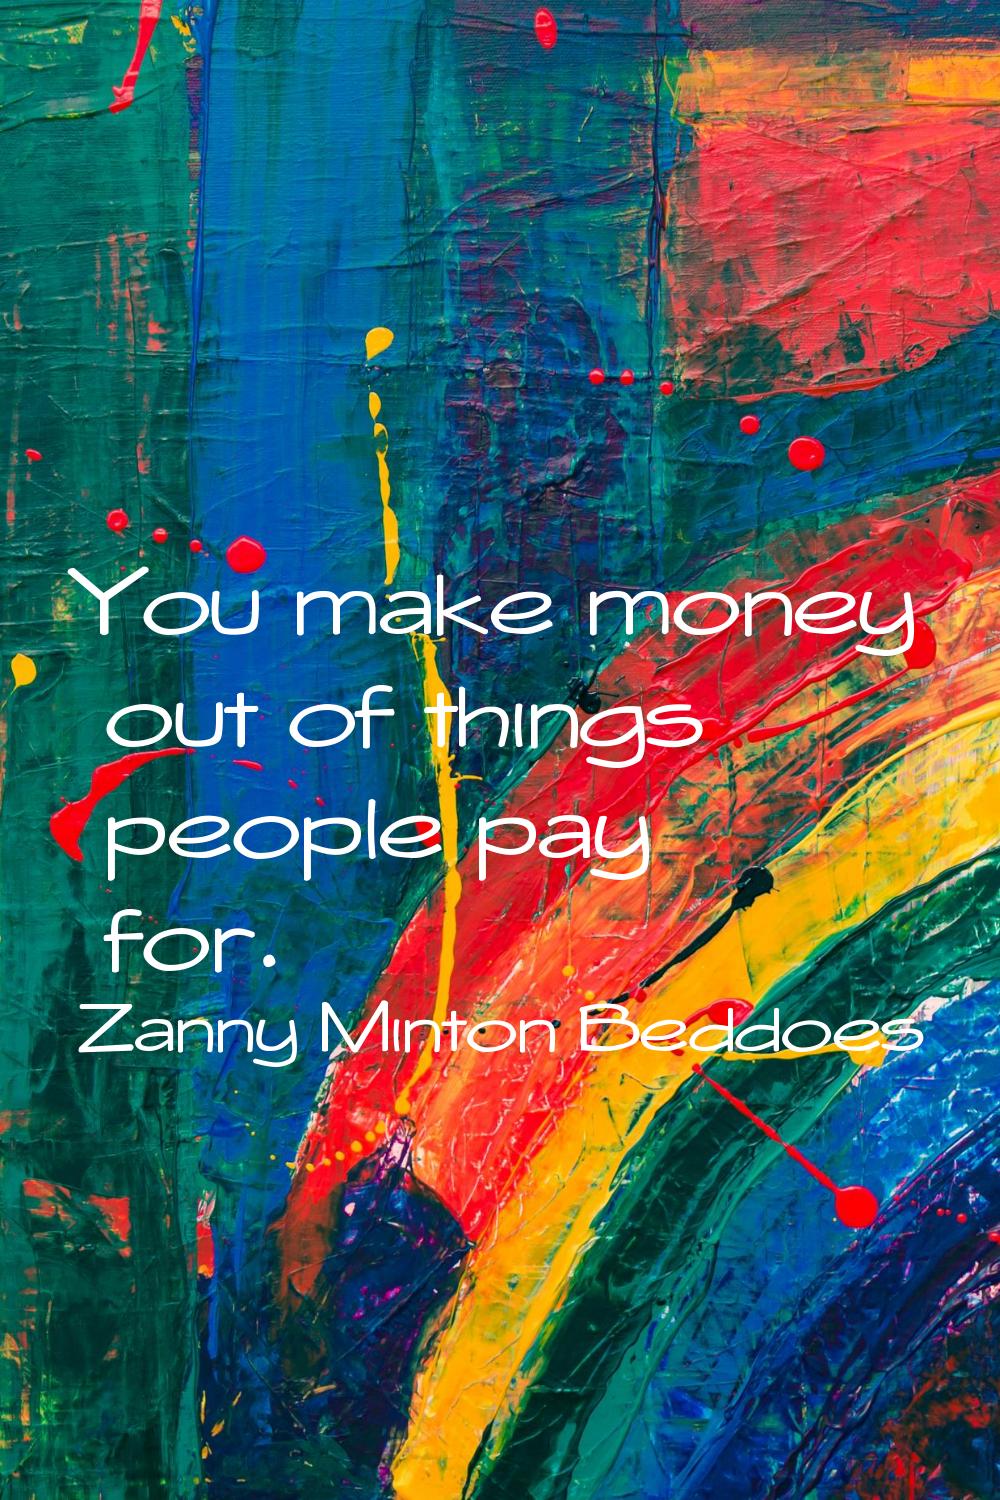 You make money out of things people pay for.